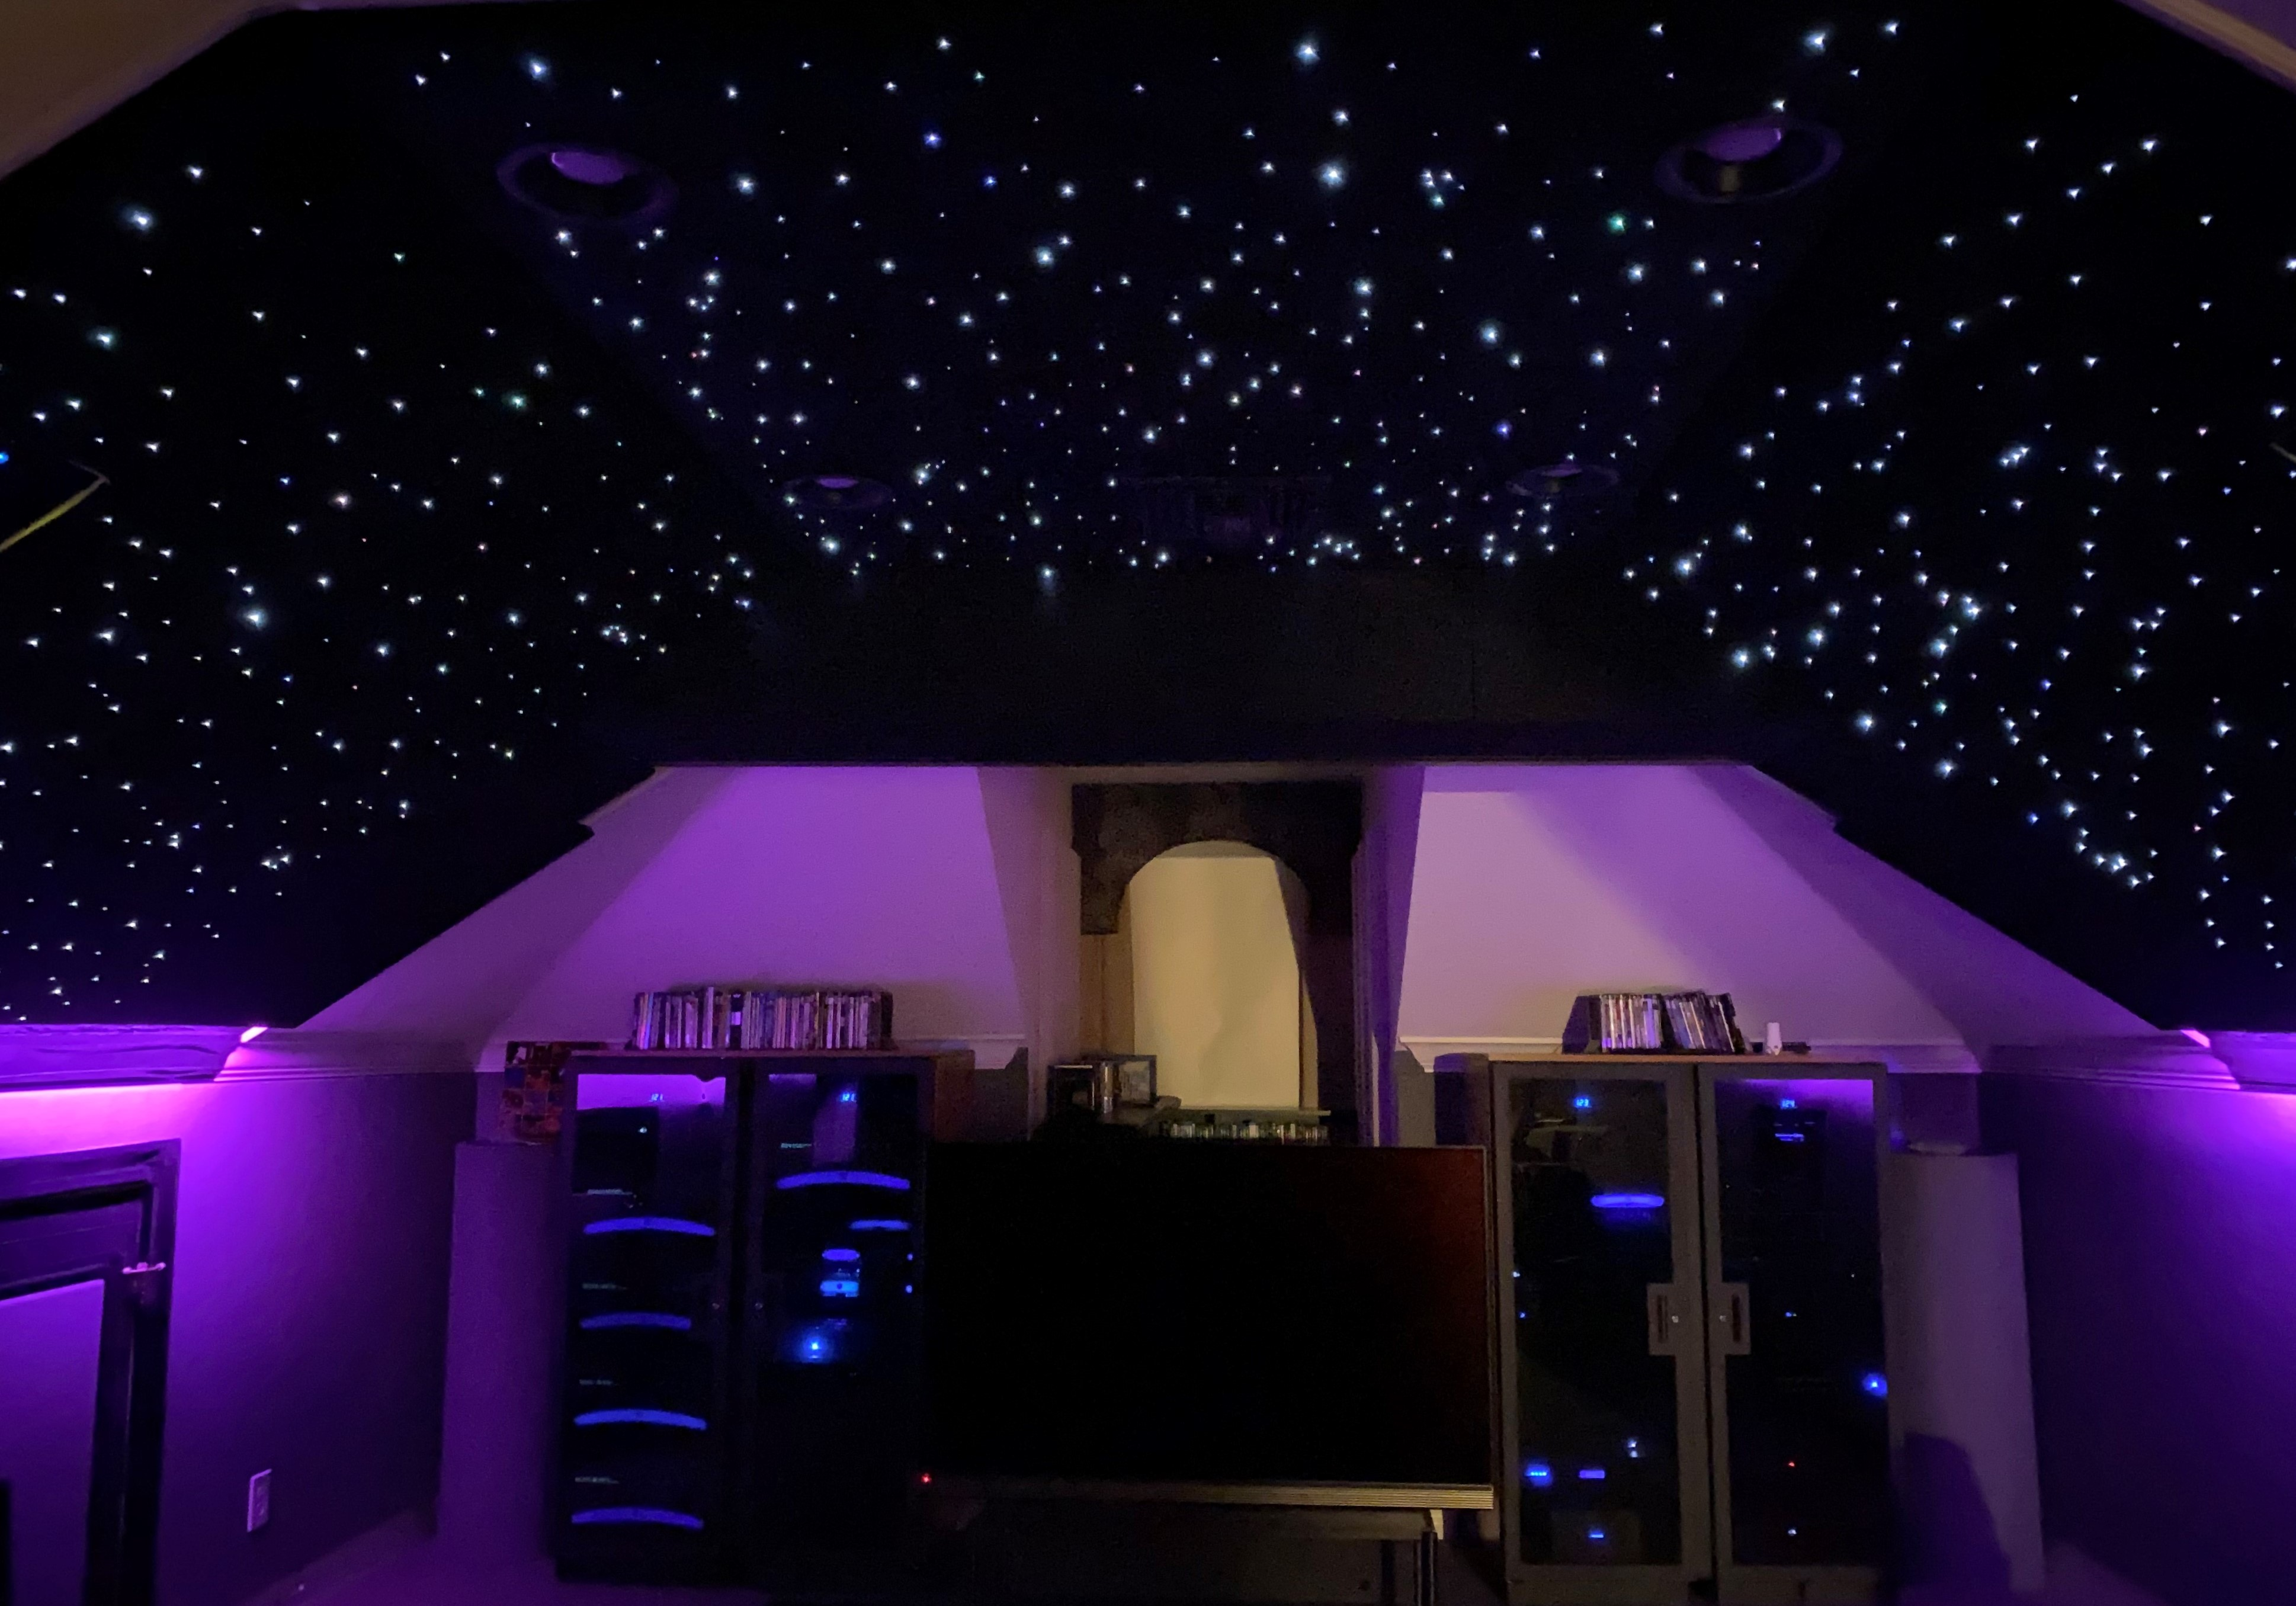 Create a Night Sky with our Ceiling Tiles! Shop Online at Home Theater Mart for your Themed Movie Décor, Unique Theater Goods, and more at Affordable Prices! Receive Free Domestic Shipping on orders over $100. Located in Chicago, IL, We Ship Nationwide. 